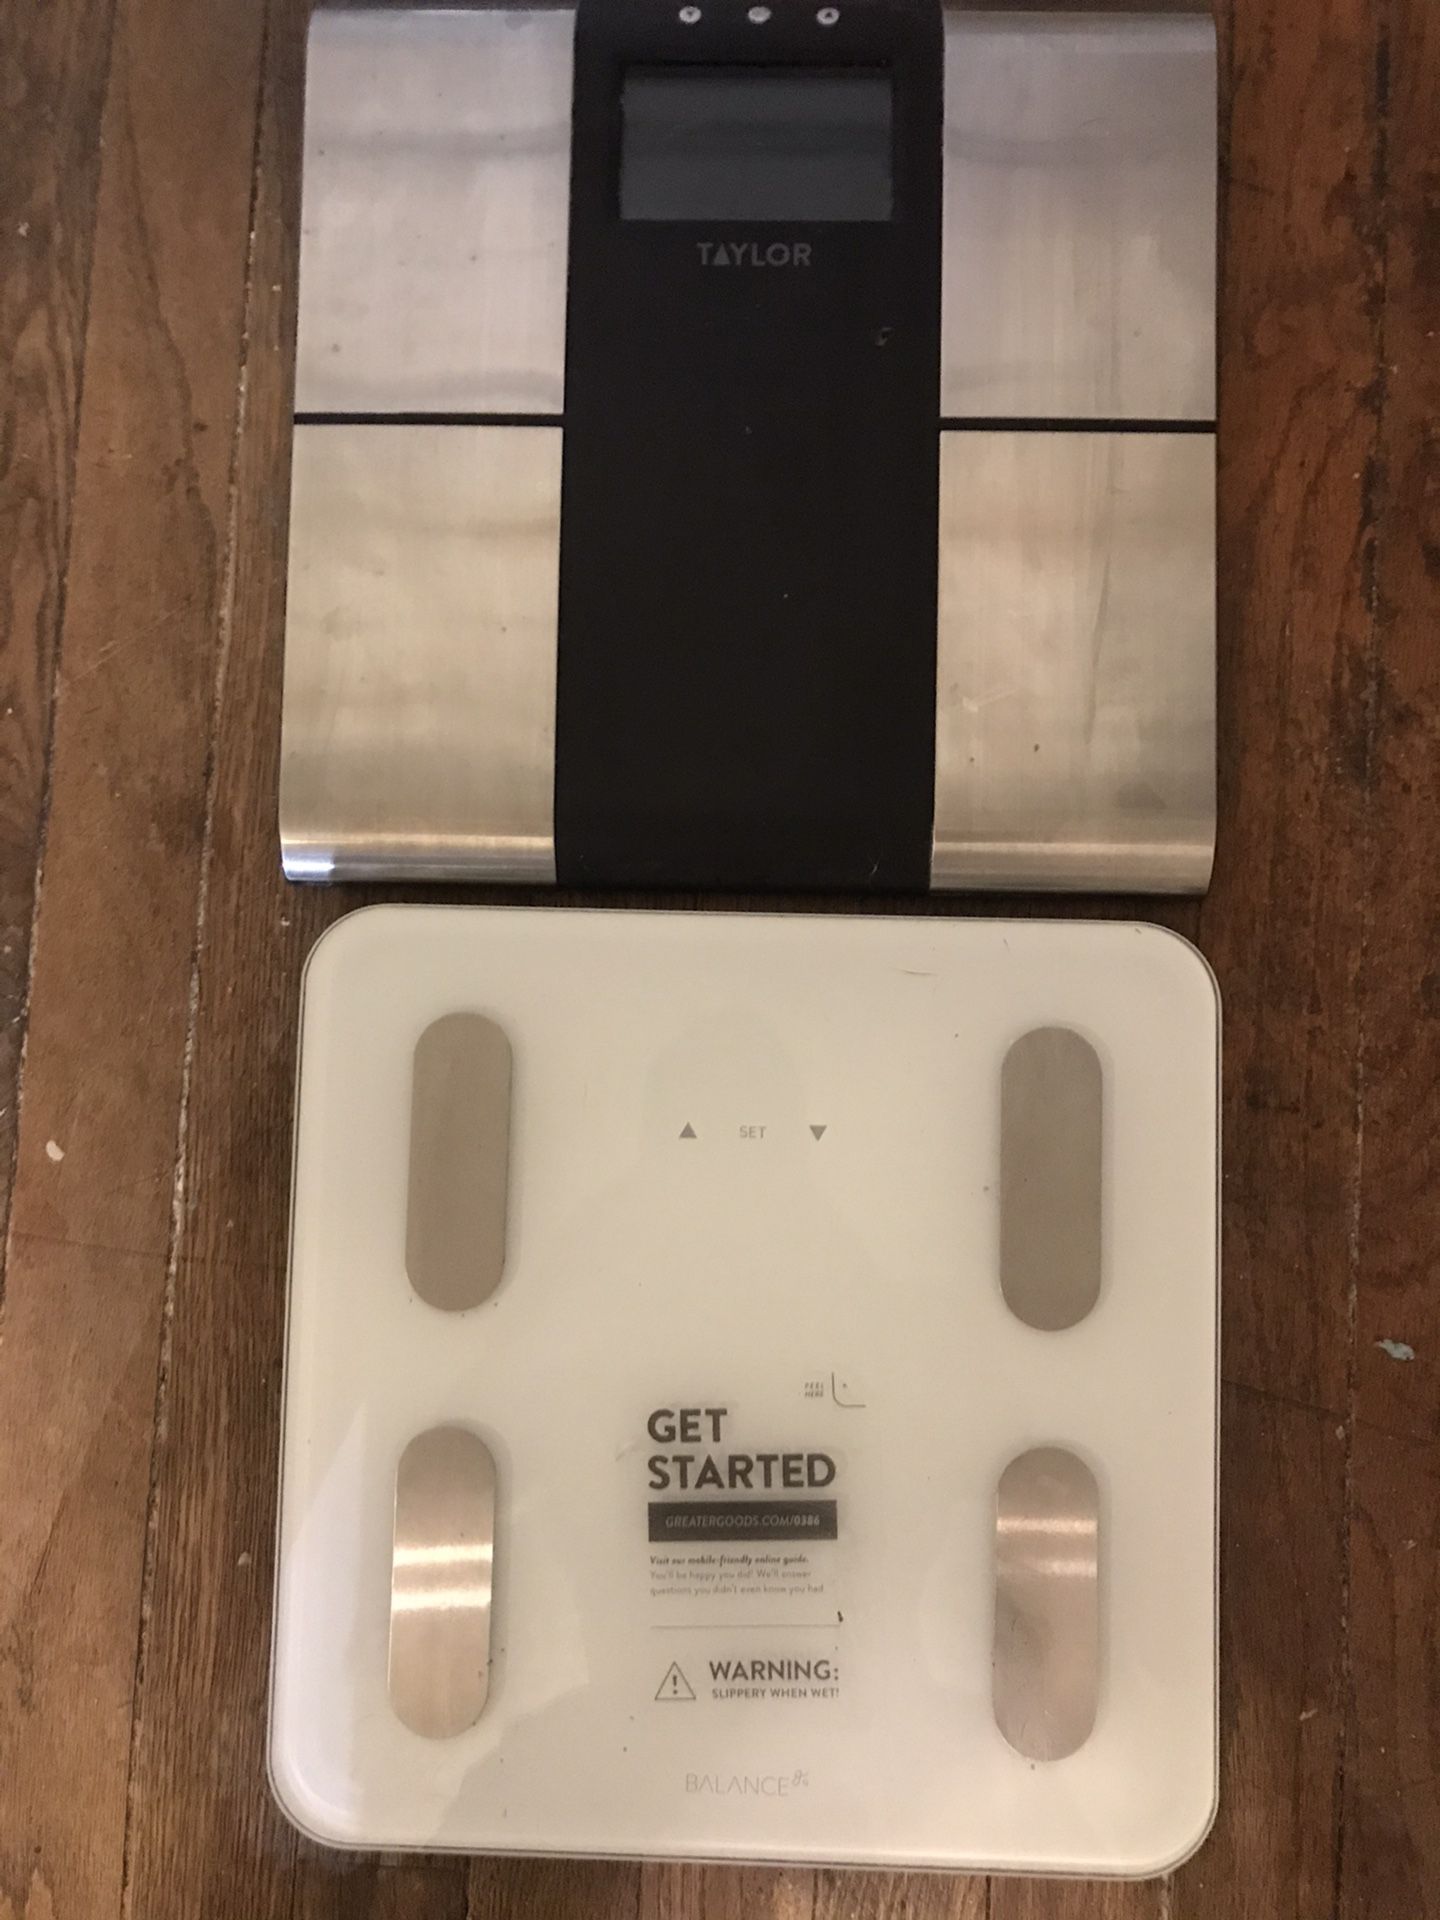 Taylor and Balance brand body composition scales.